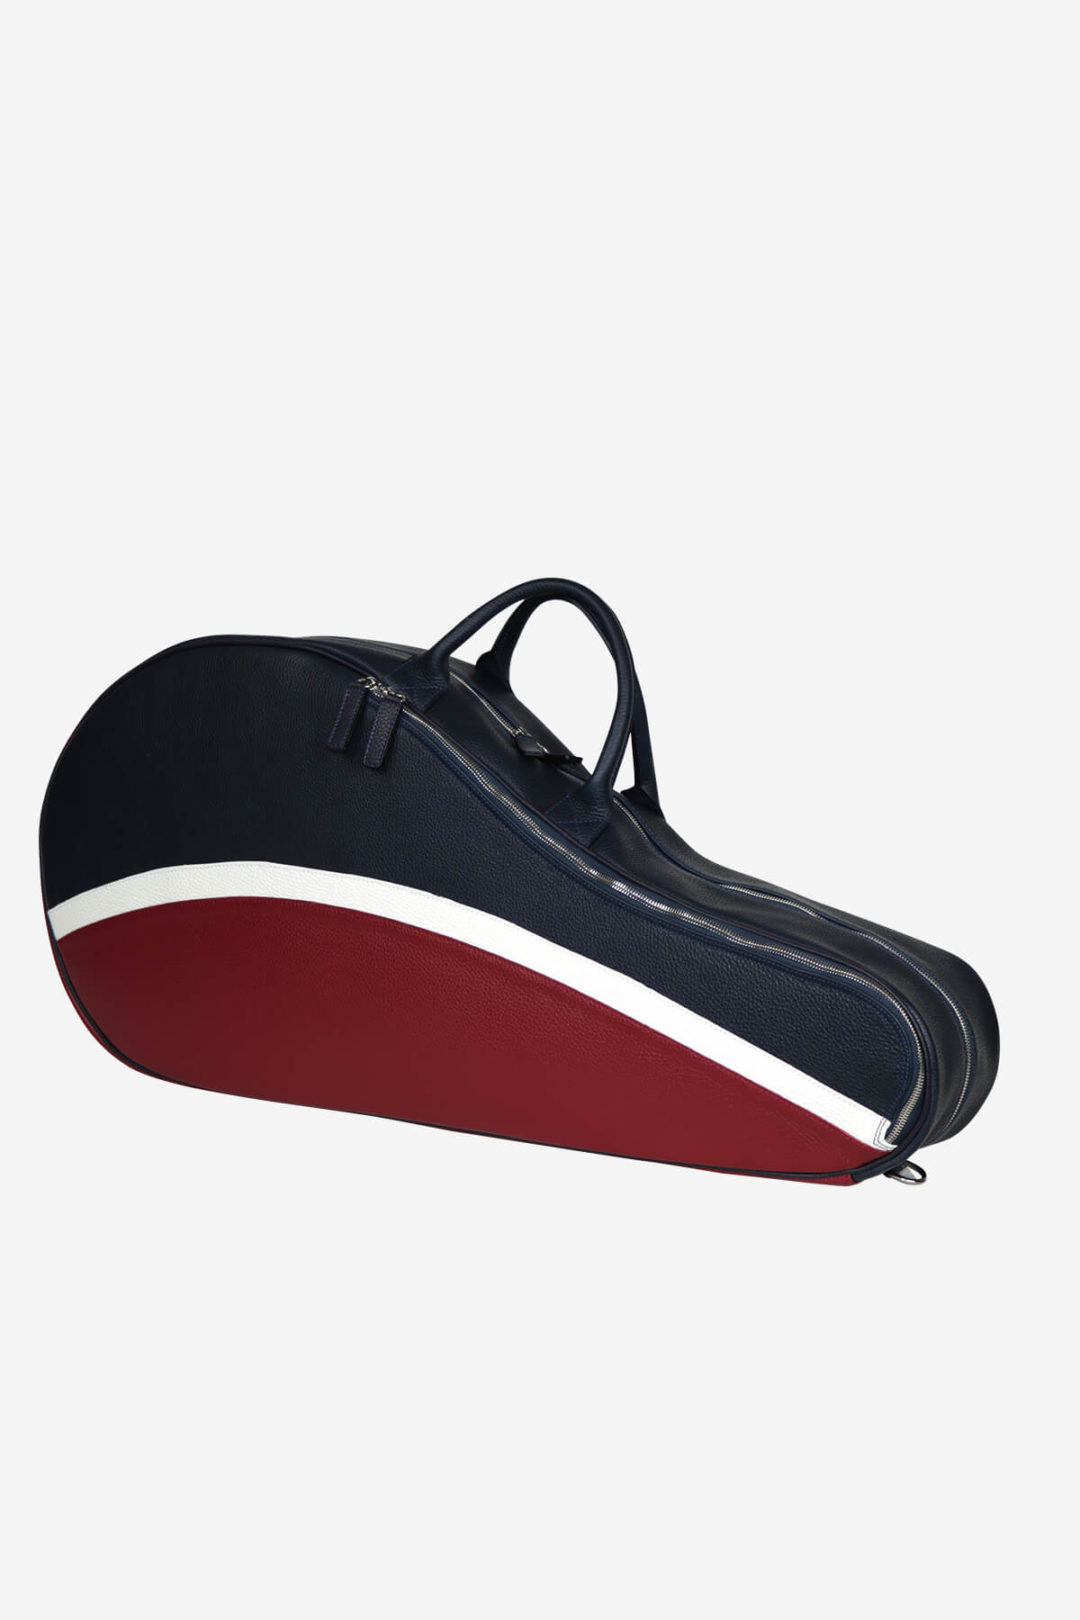 Italian Tradition in Fashion Sinuous Tennis Bag limited edition